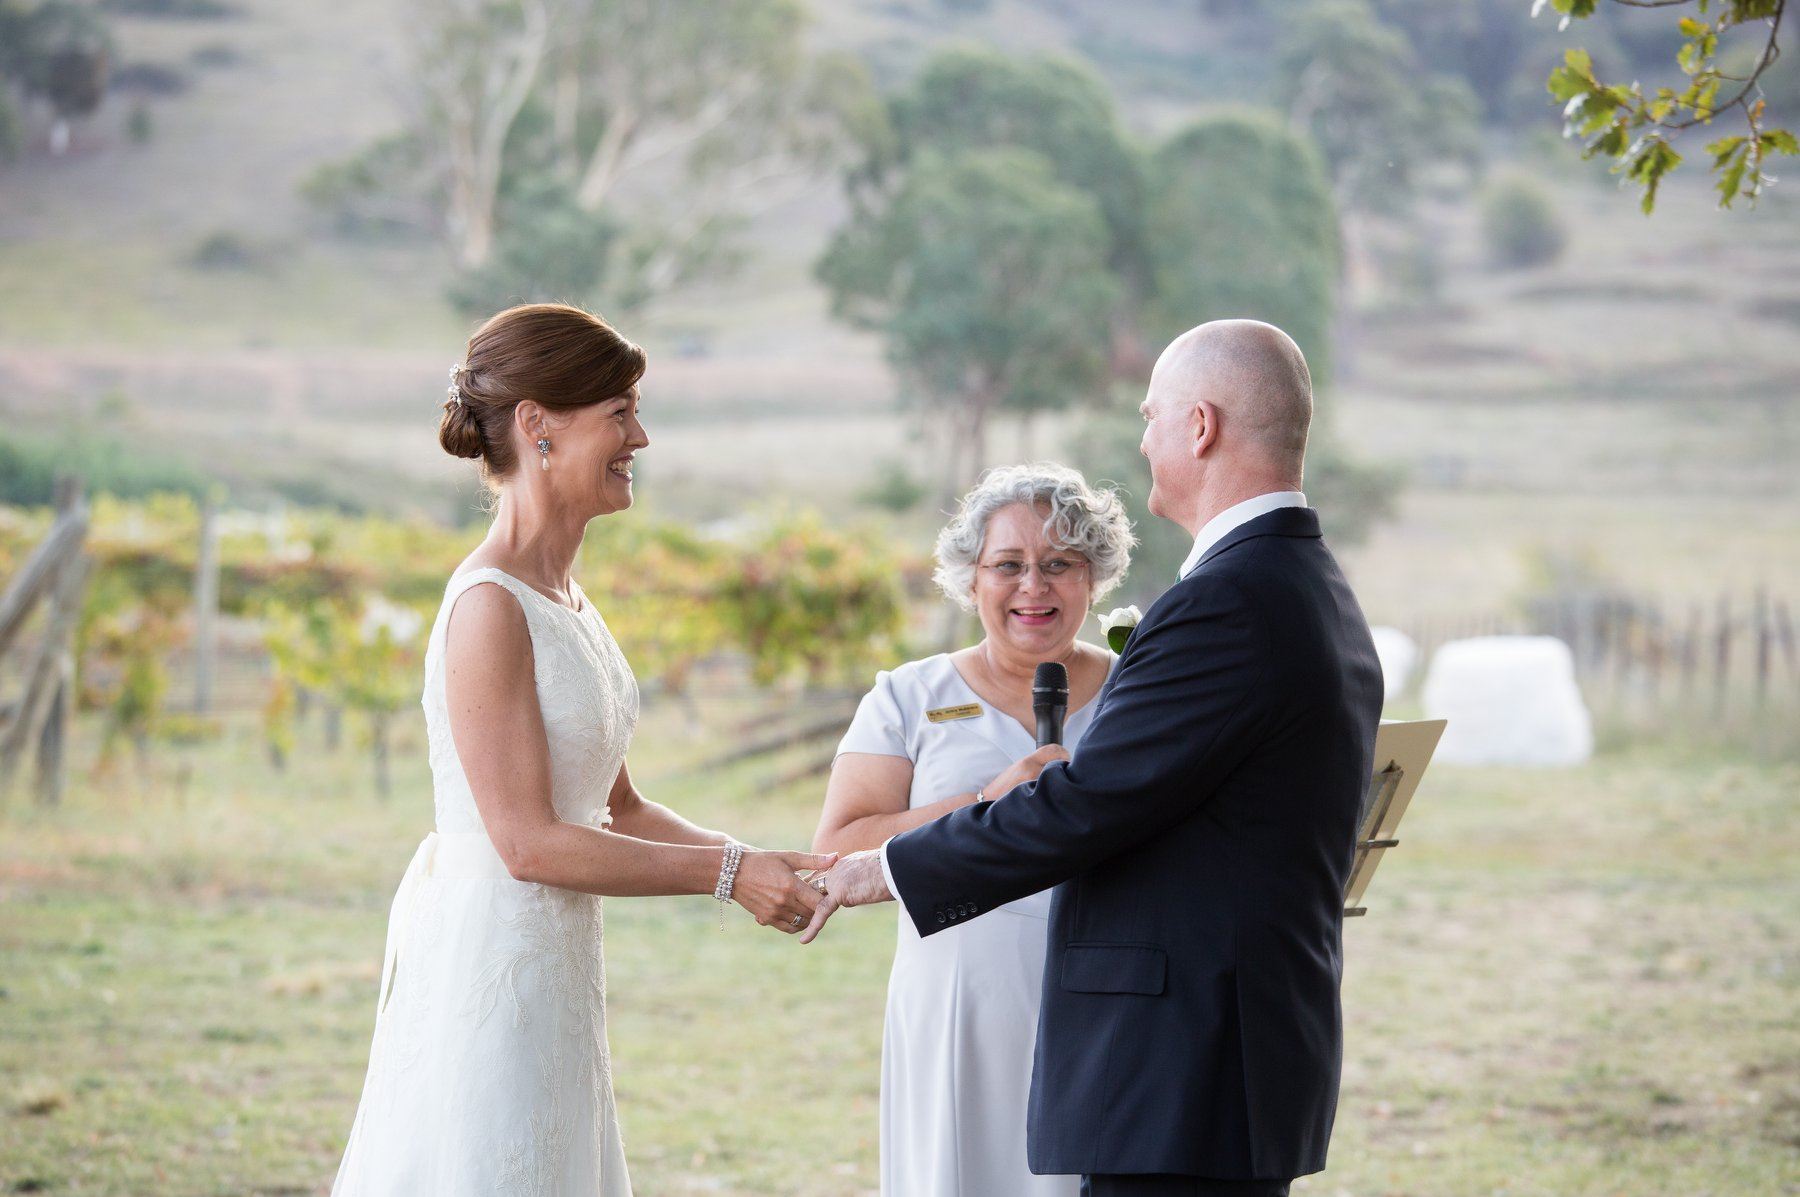 Two Wed Ceremonies Janice Mulleneux Canberra Celebrant